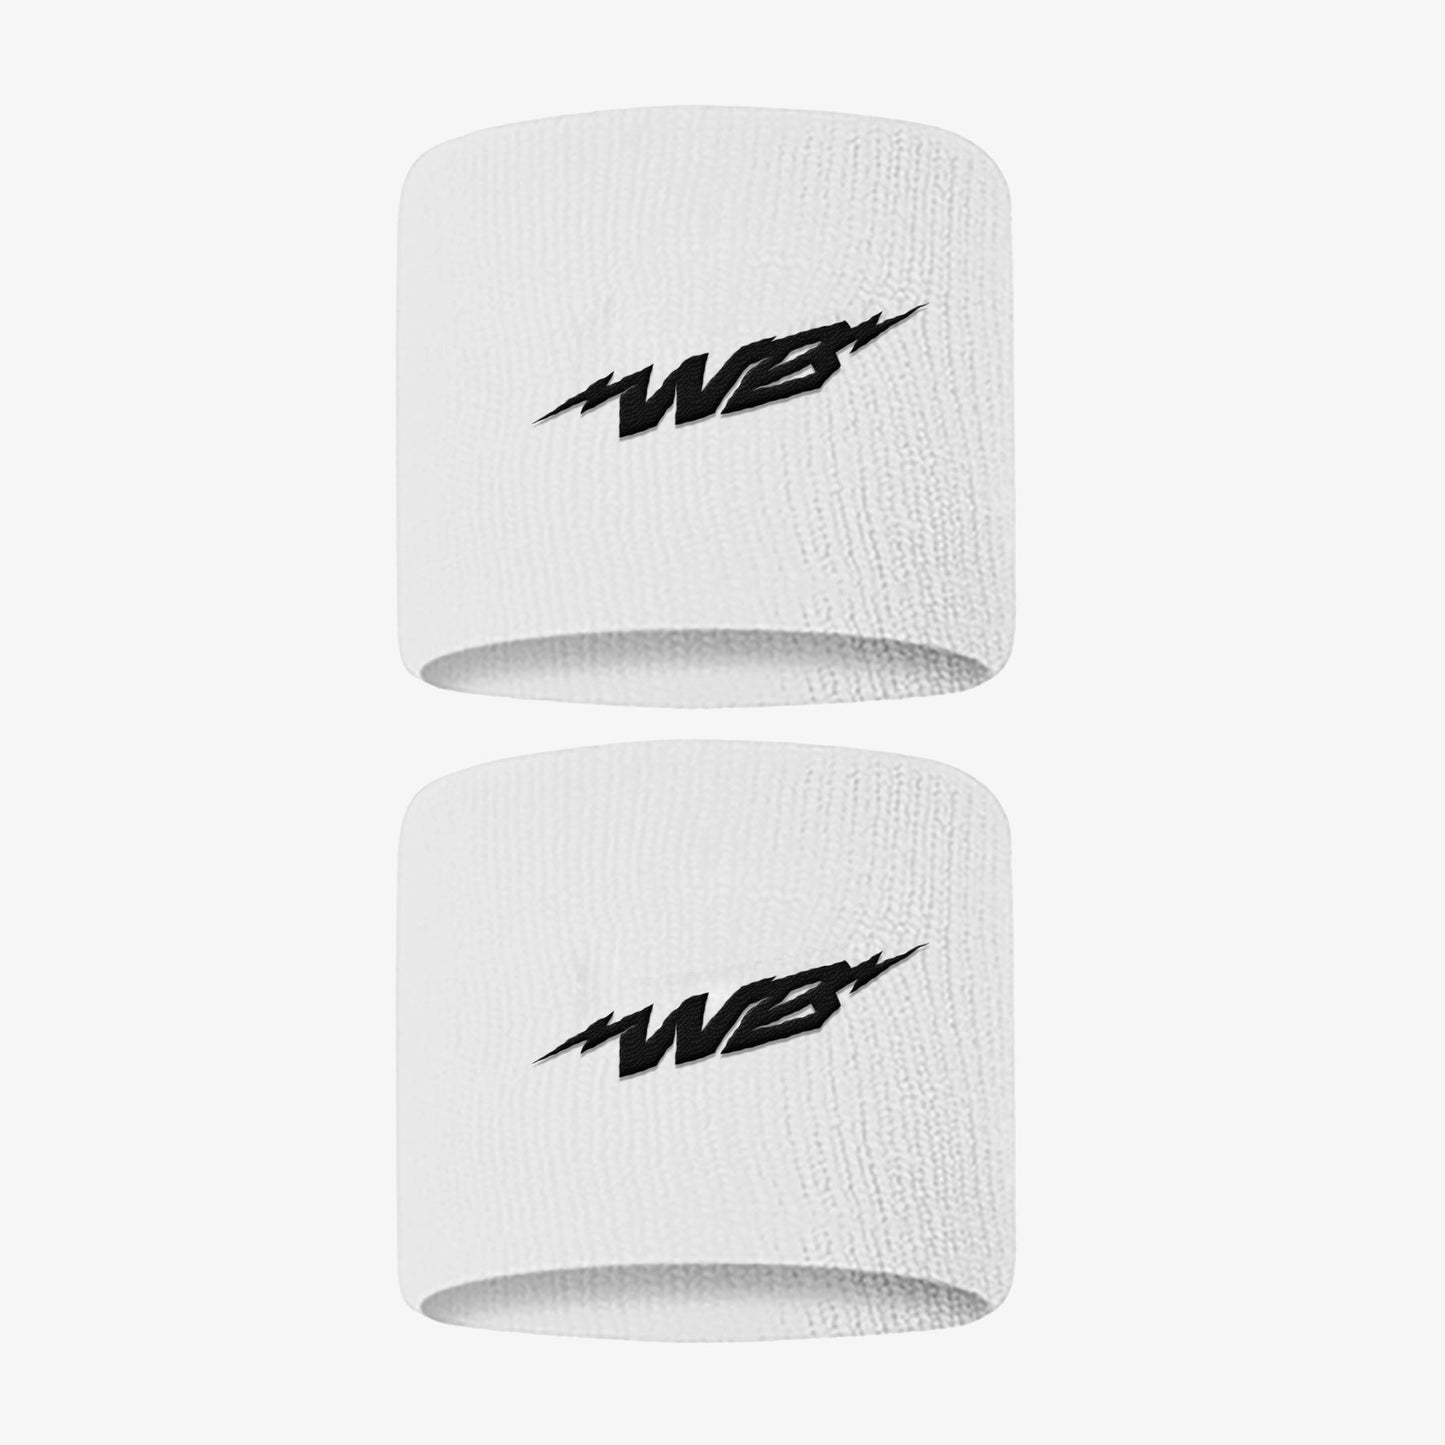 3" WRISTBANDS (WHITE, 2-PACK) - We Ball Sports